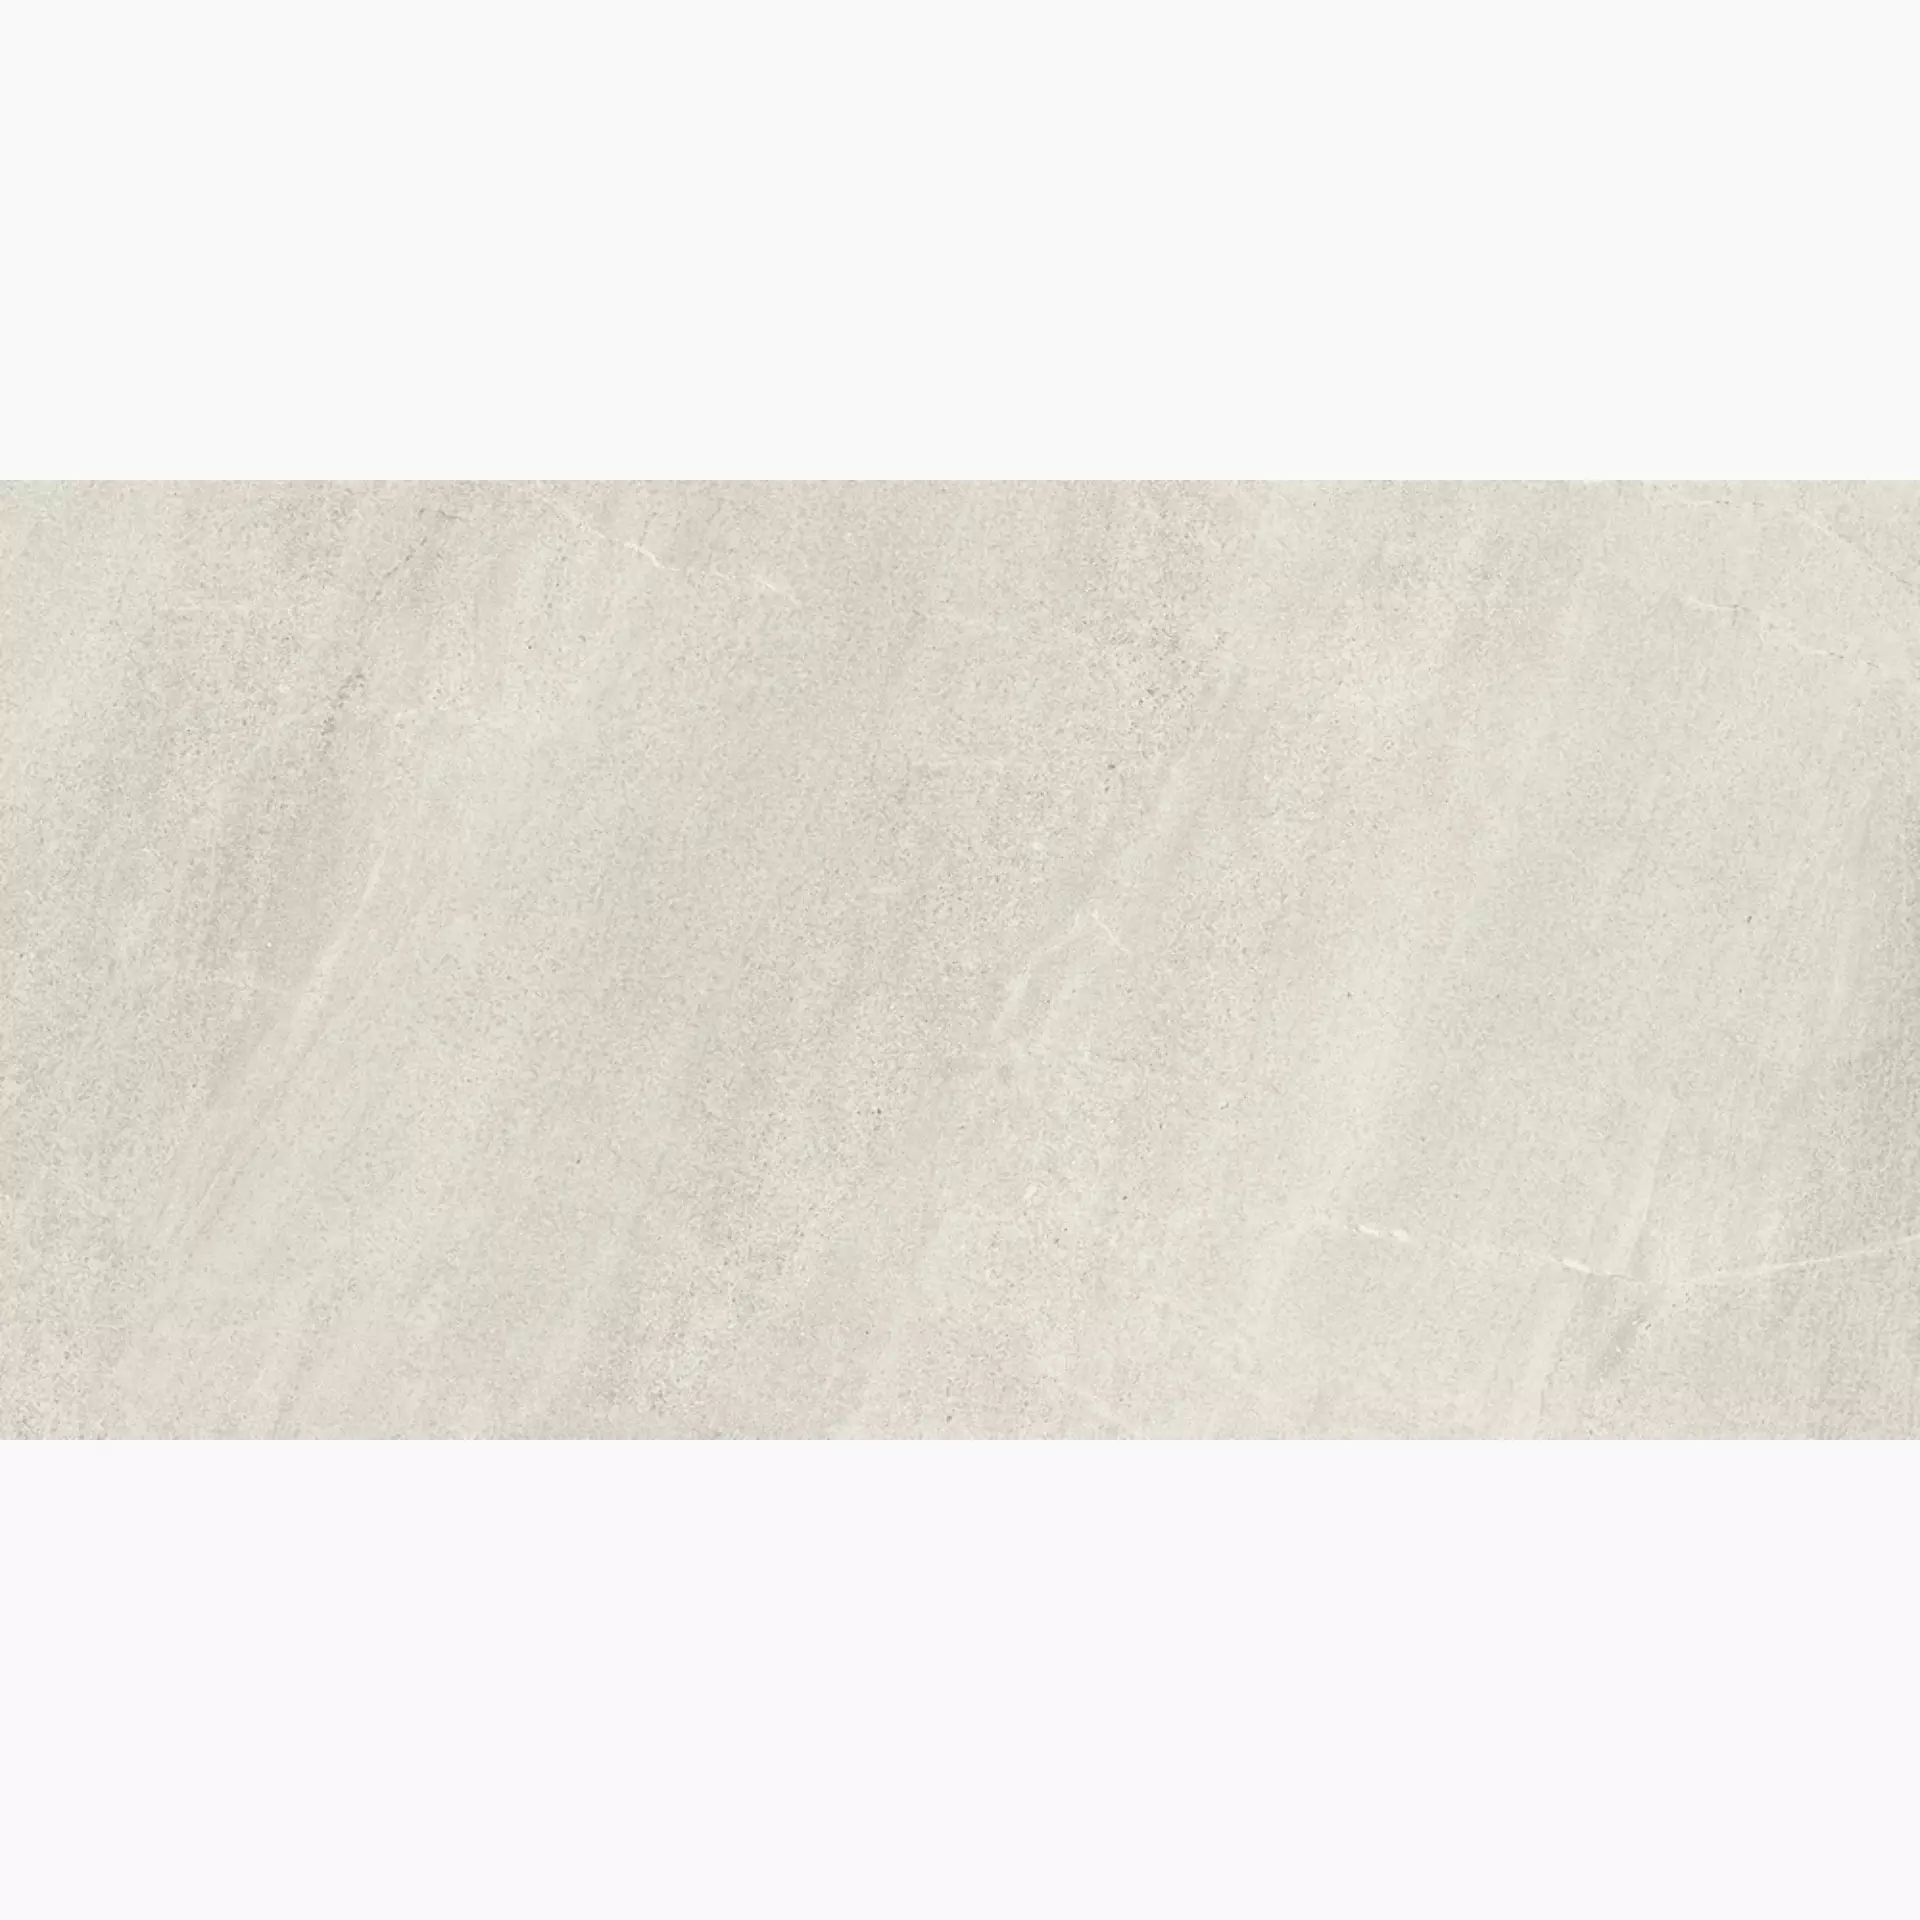 Cottodeste Limestone Clay Blazed Protect EGXLS15 60x120cm rectified 14mm